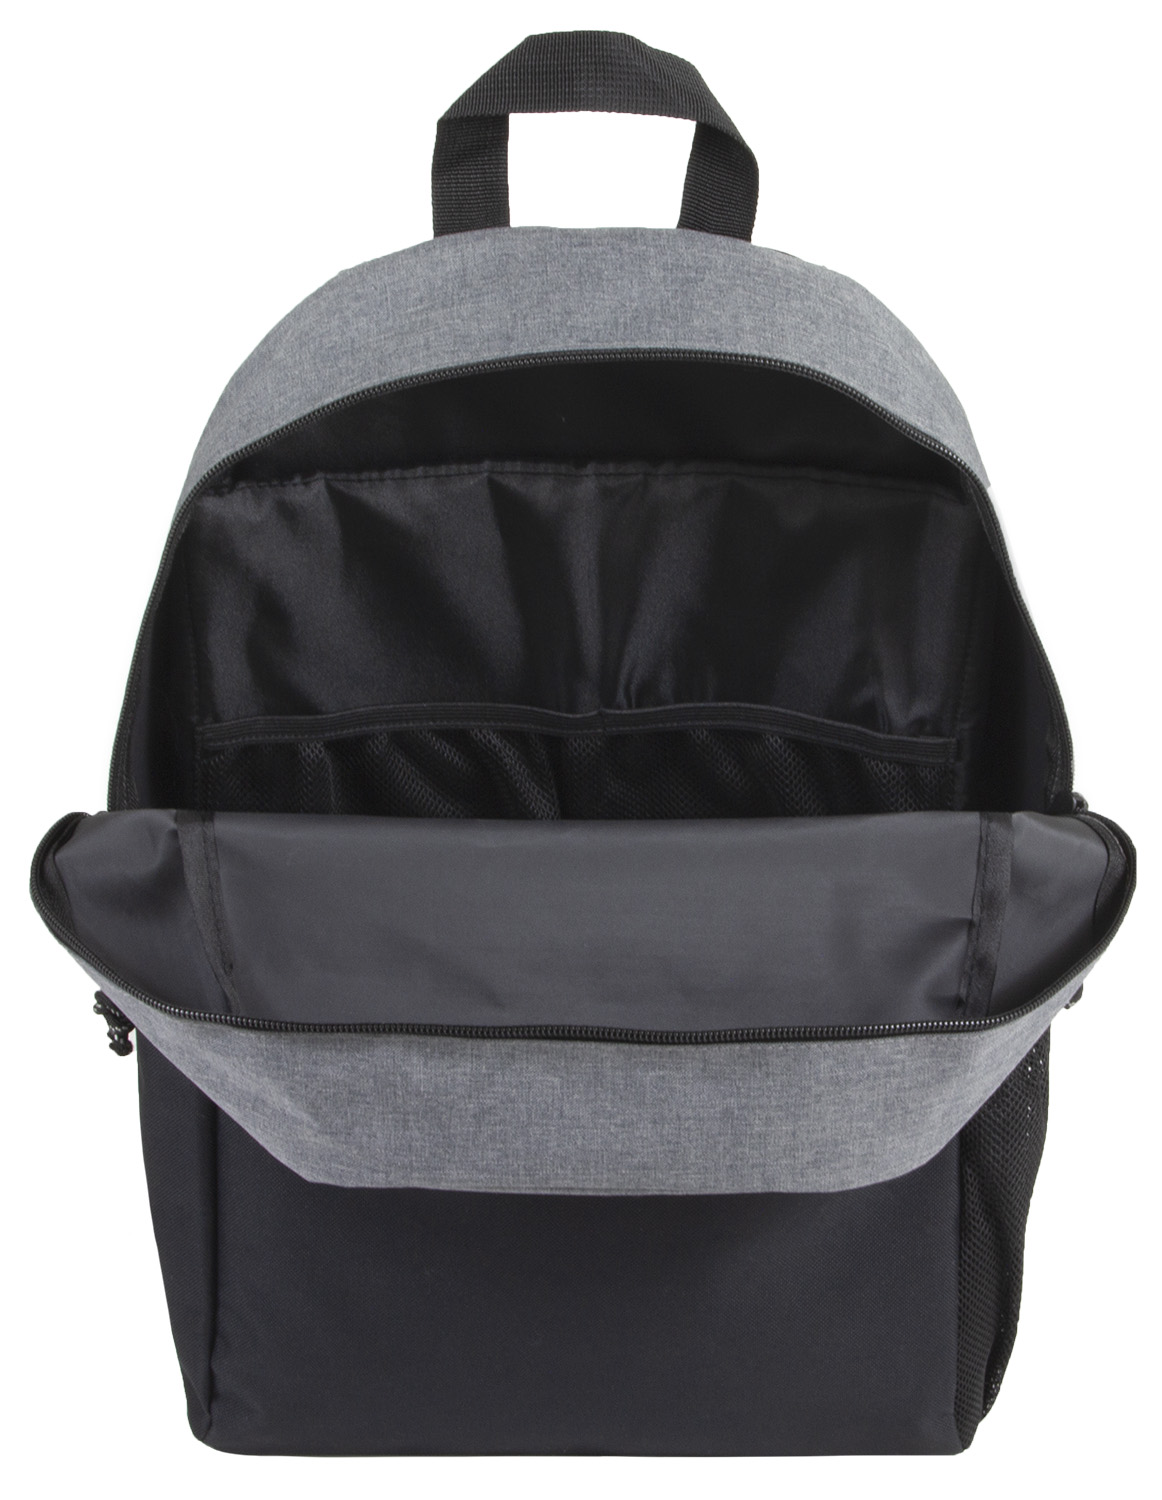 Buy Champion Grey Black Backpack with Adjustable Straps Online in Zealand.